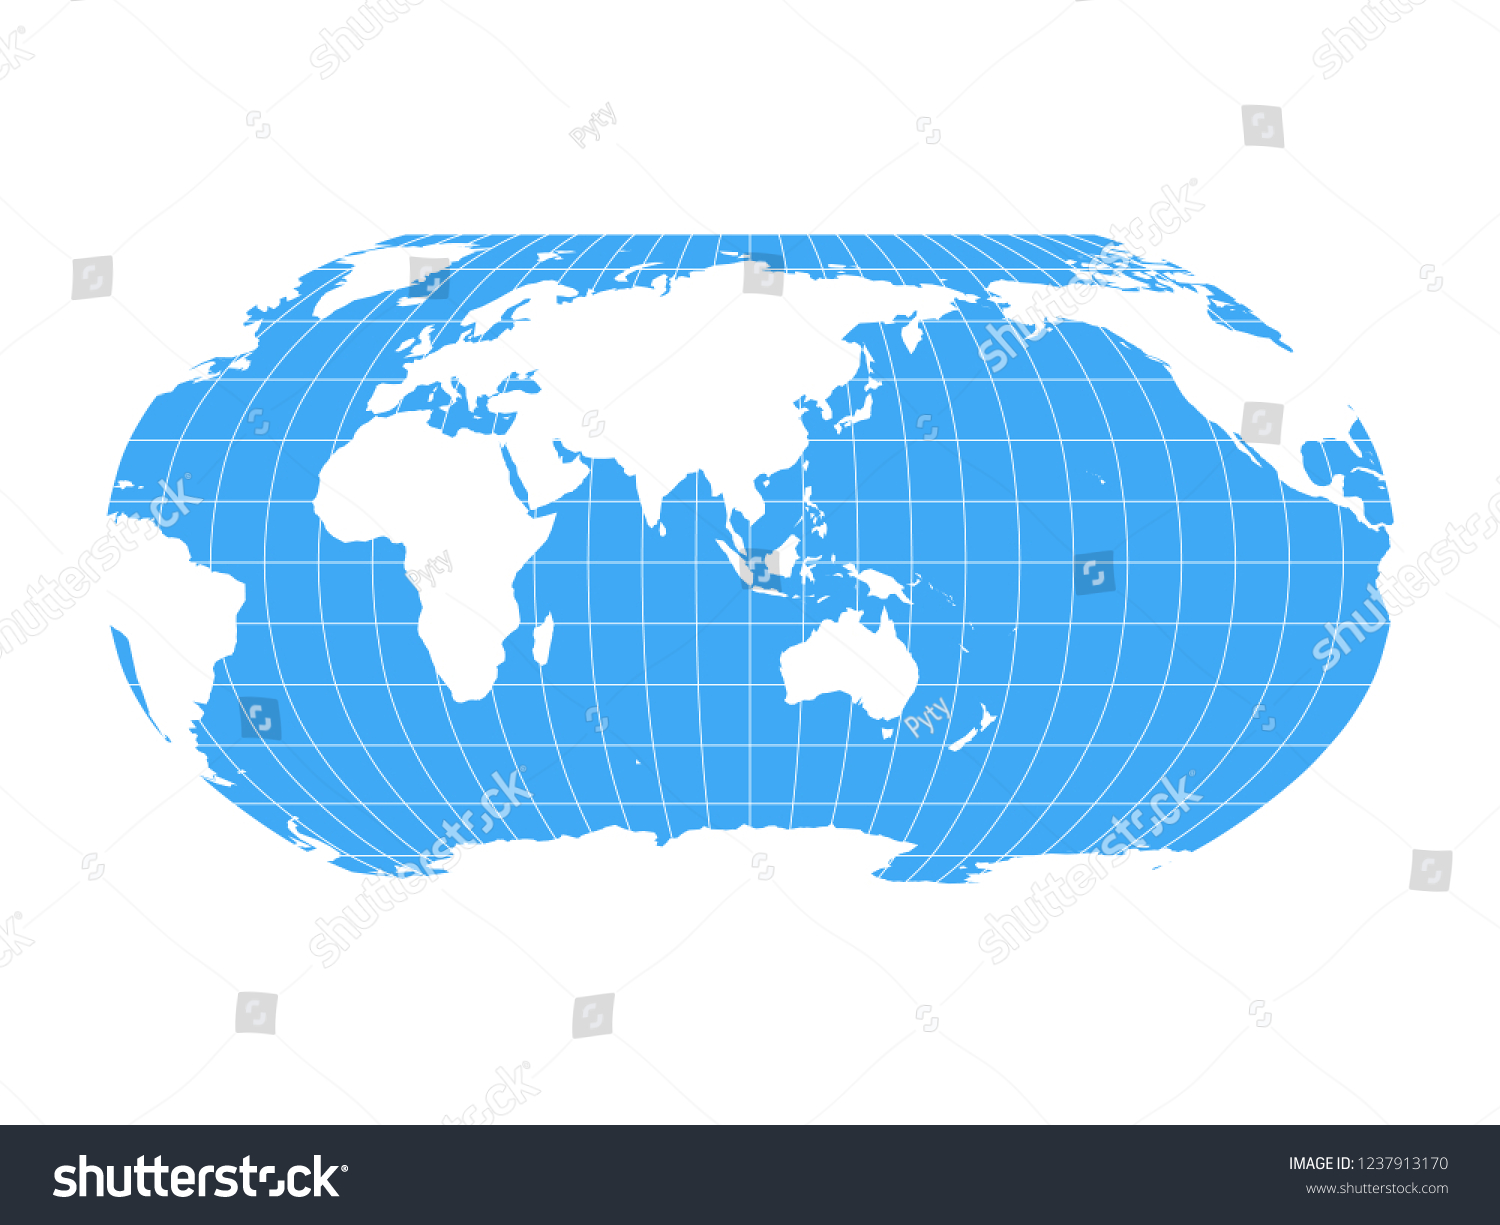 World Map Robinson Projection Meridians Parallels Stock Vector Royalty Free 1237913170 6672